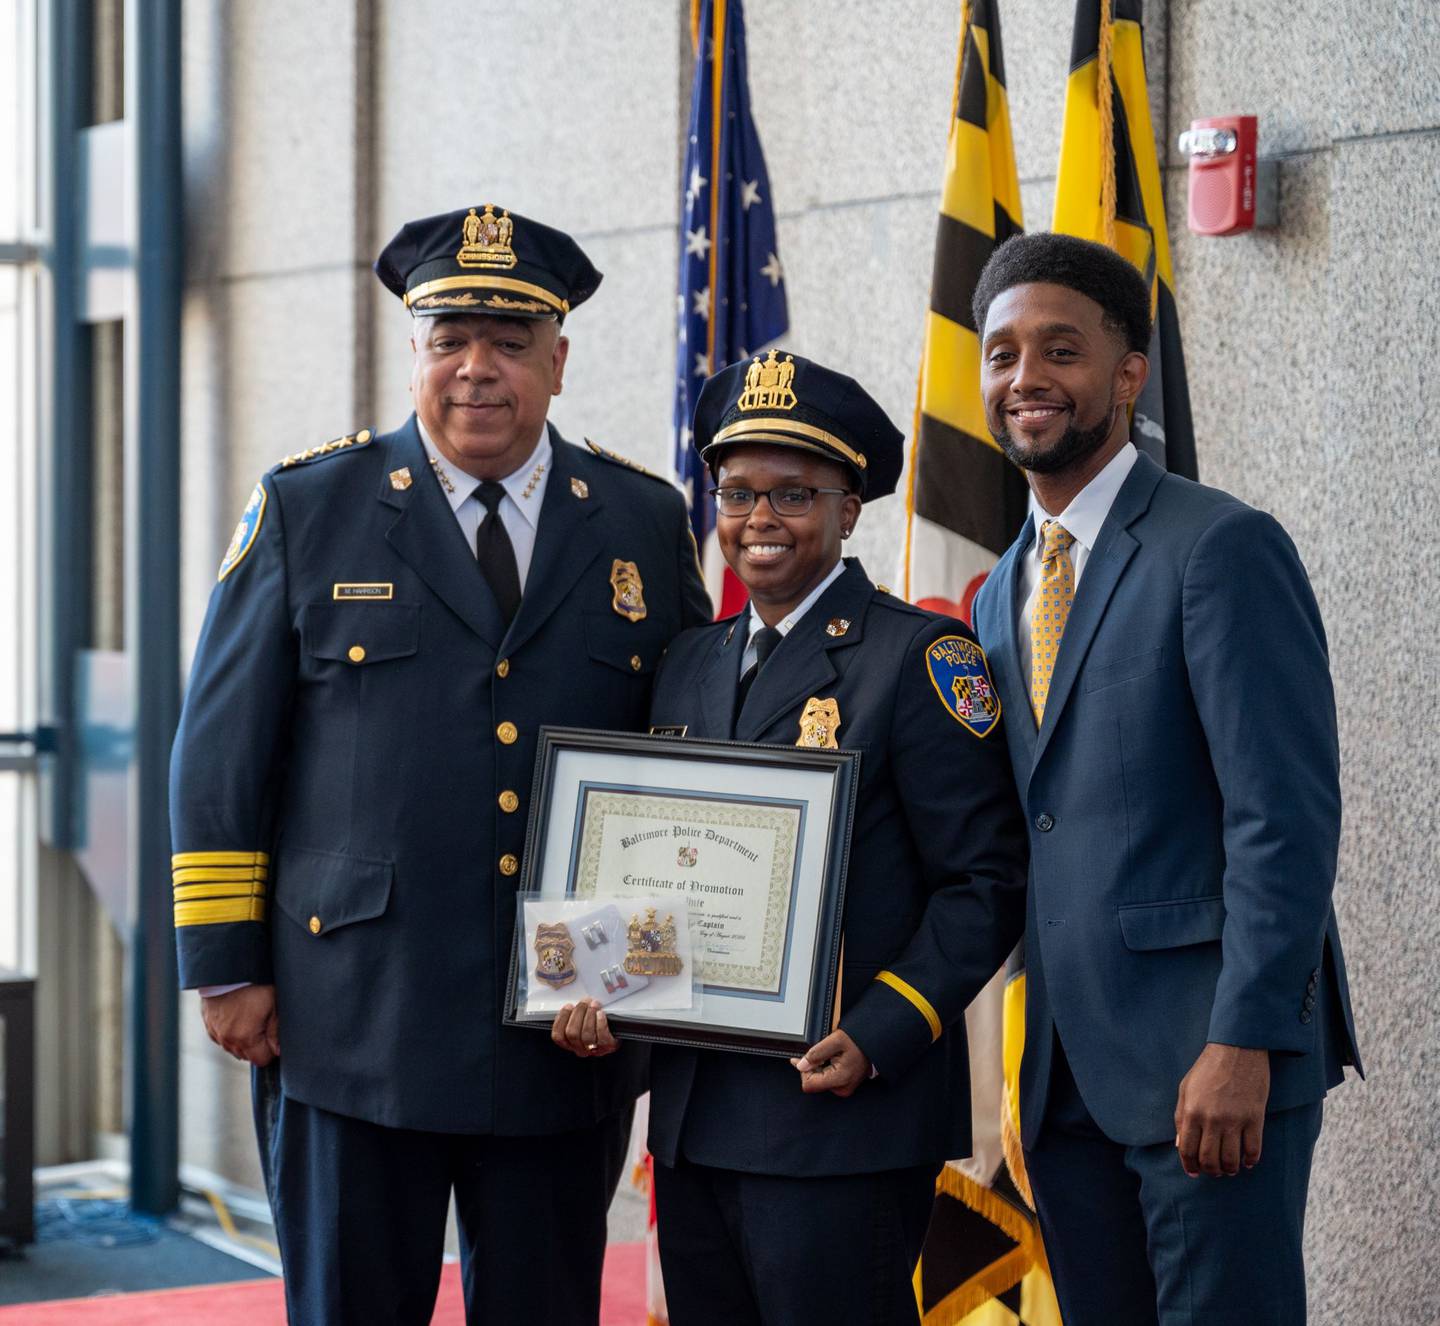 Baltimore Police Commissioner Michael Harrison, left, and Mayor Brandon Scott, right, at the promotion to captain for Alicia White, whose name became known around the country after the death of Freddie Gray.